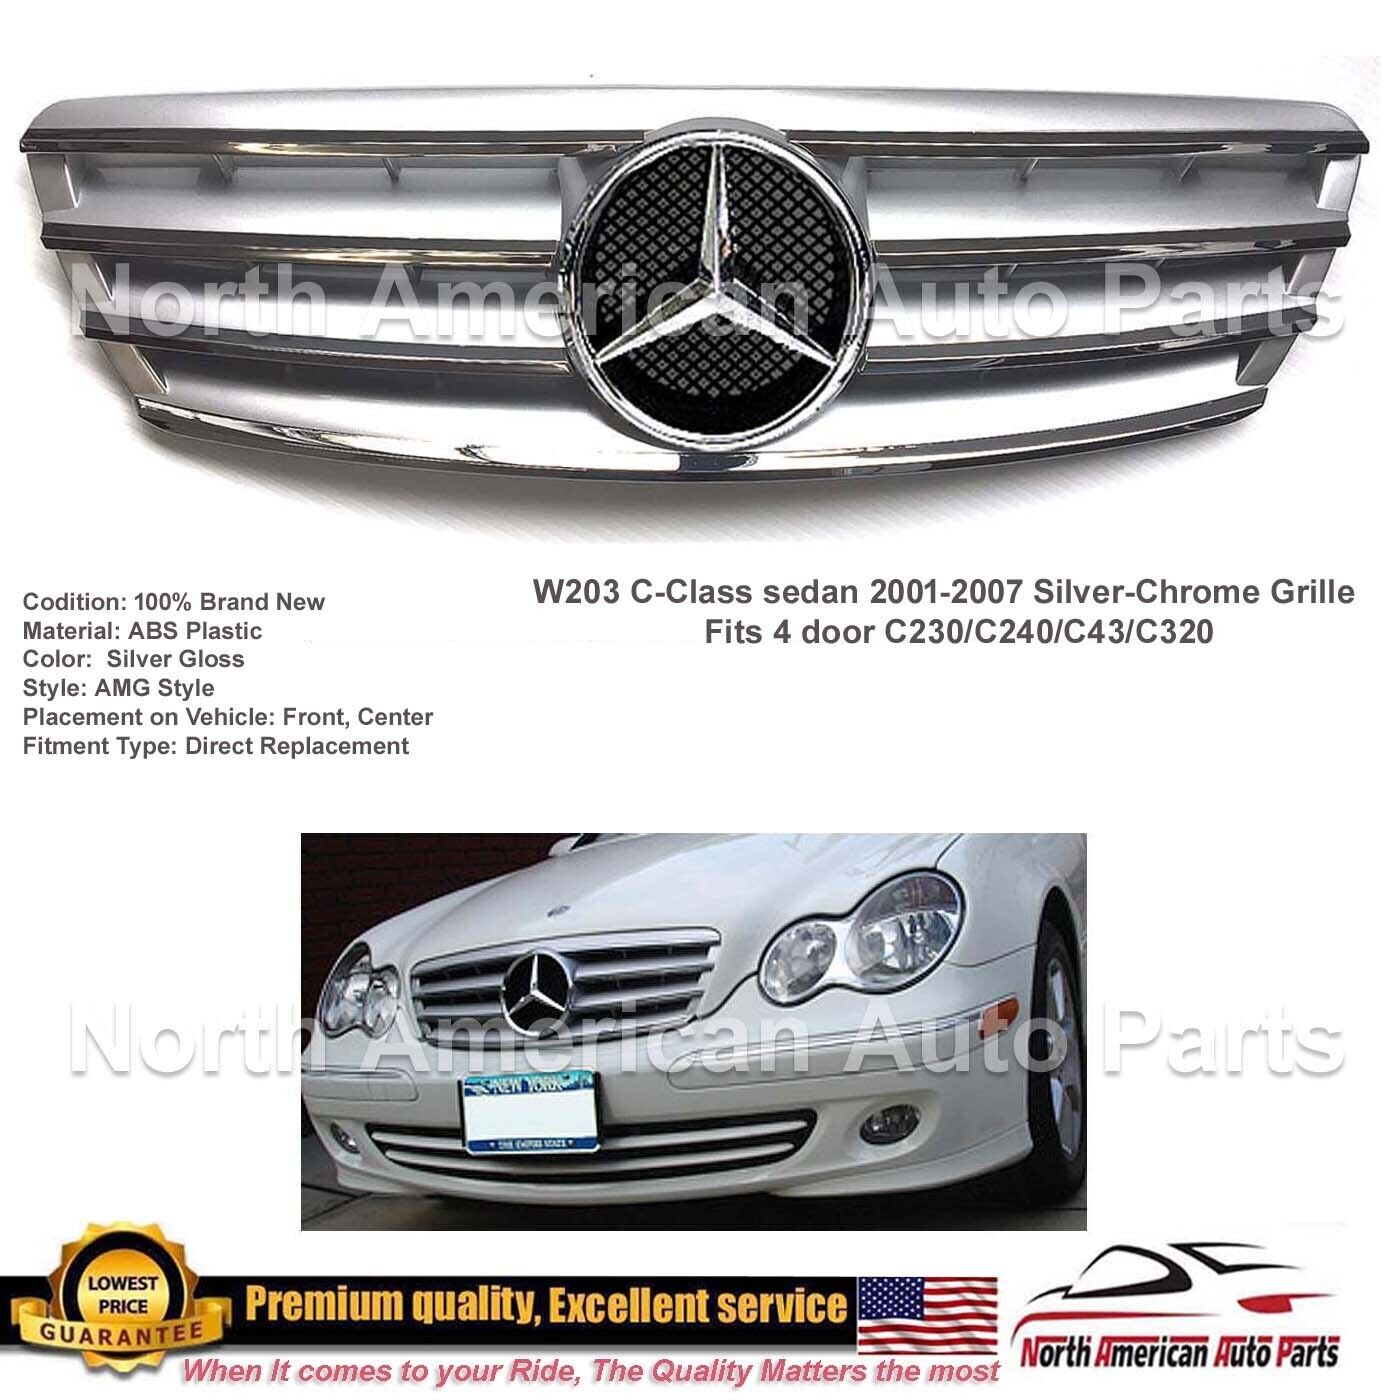 C63 AMG Style Grille Silver-Chrome Star 2001 2002 2004 2005 2006 C240 C230 C320